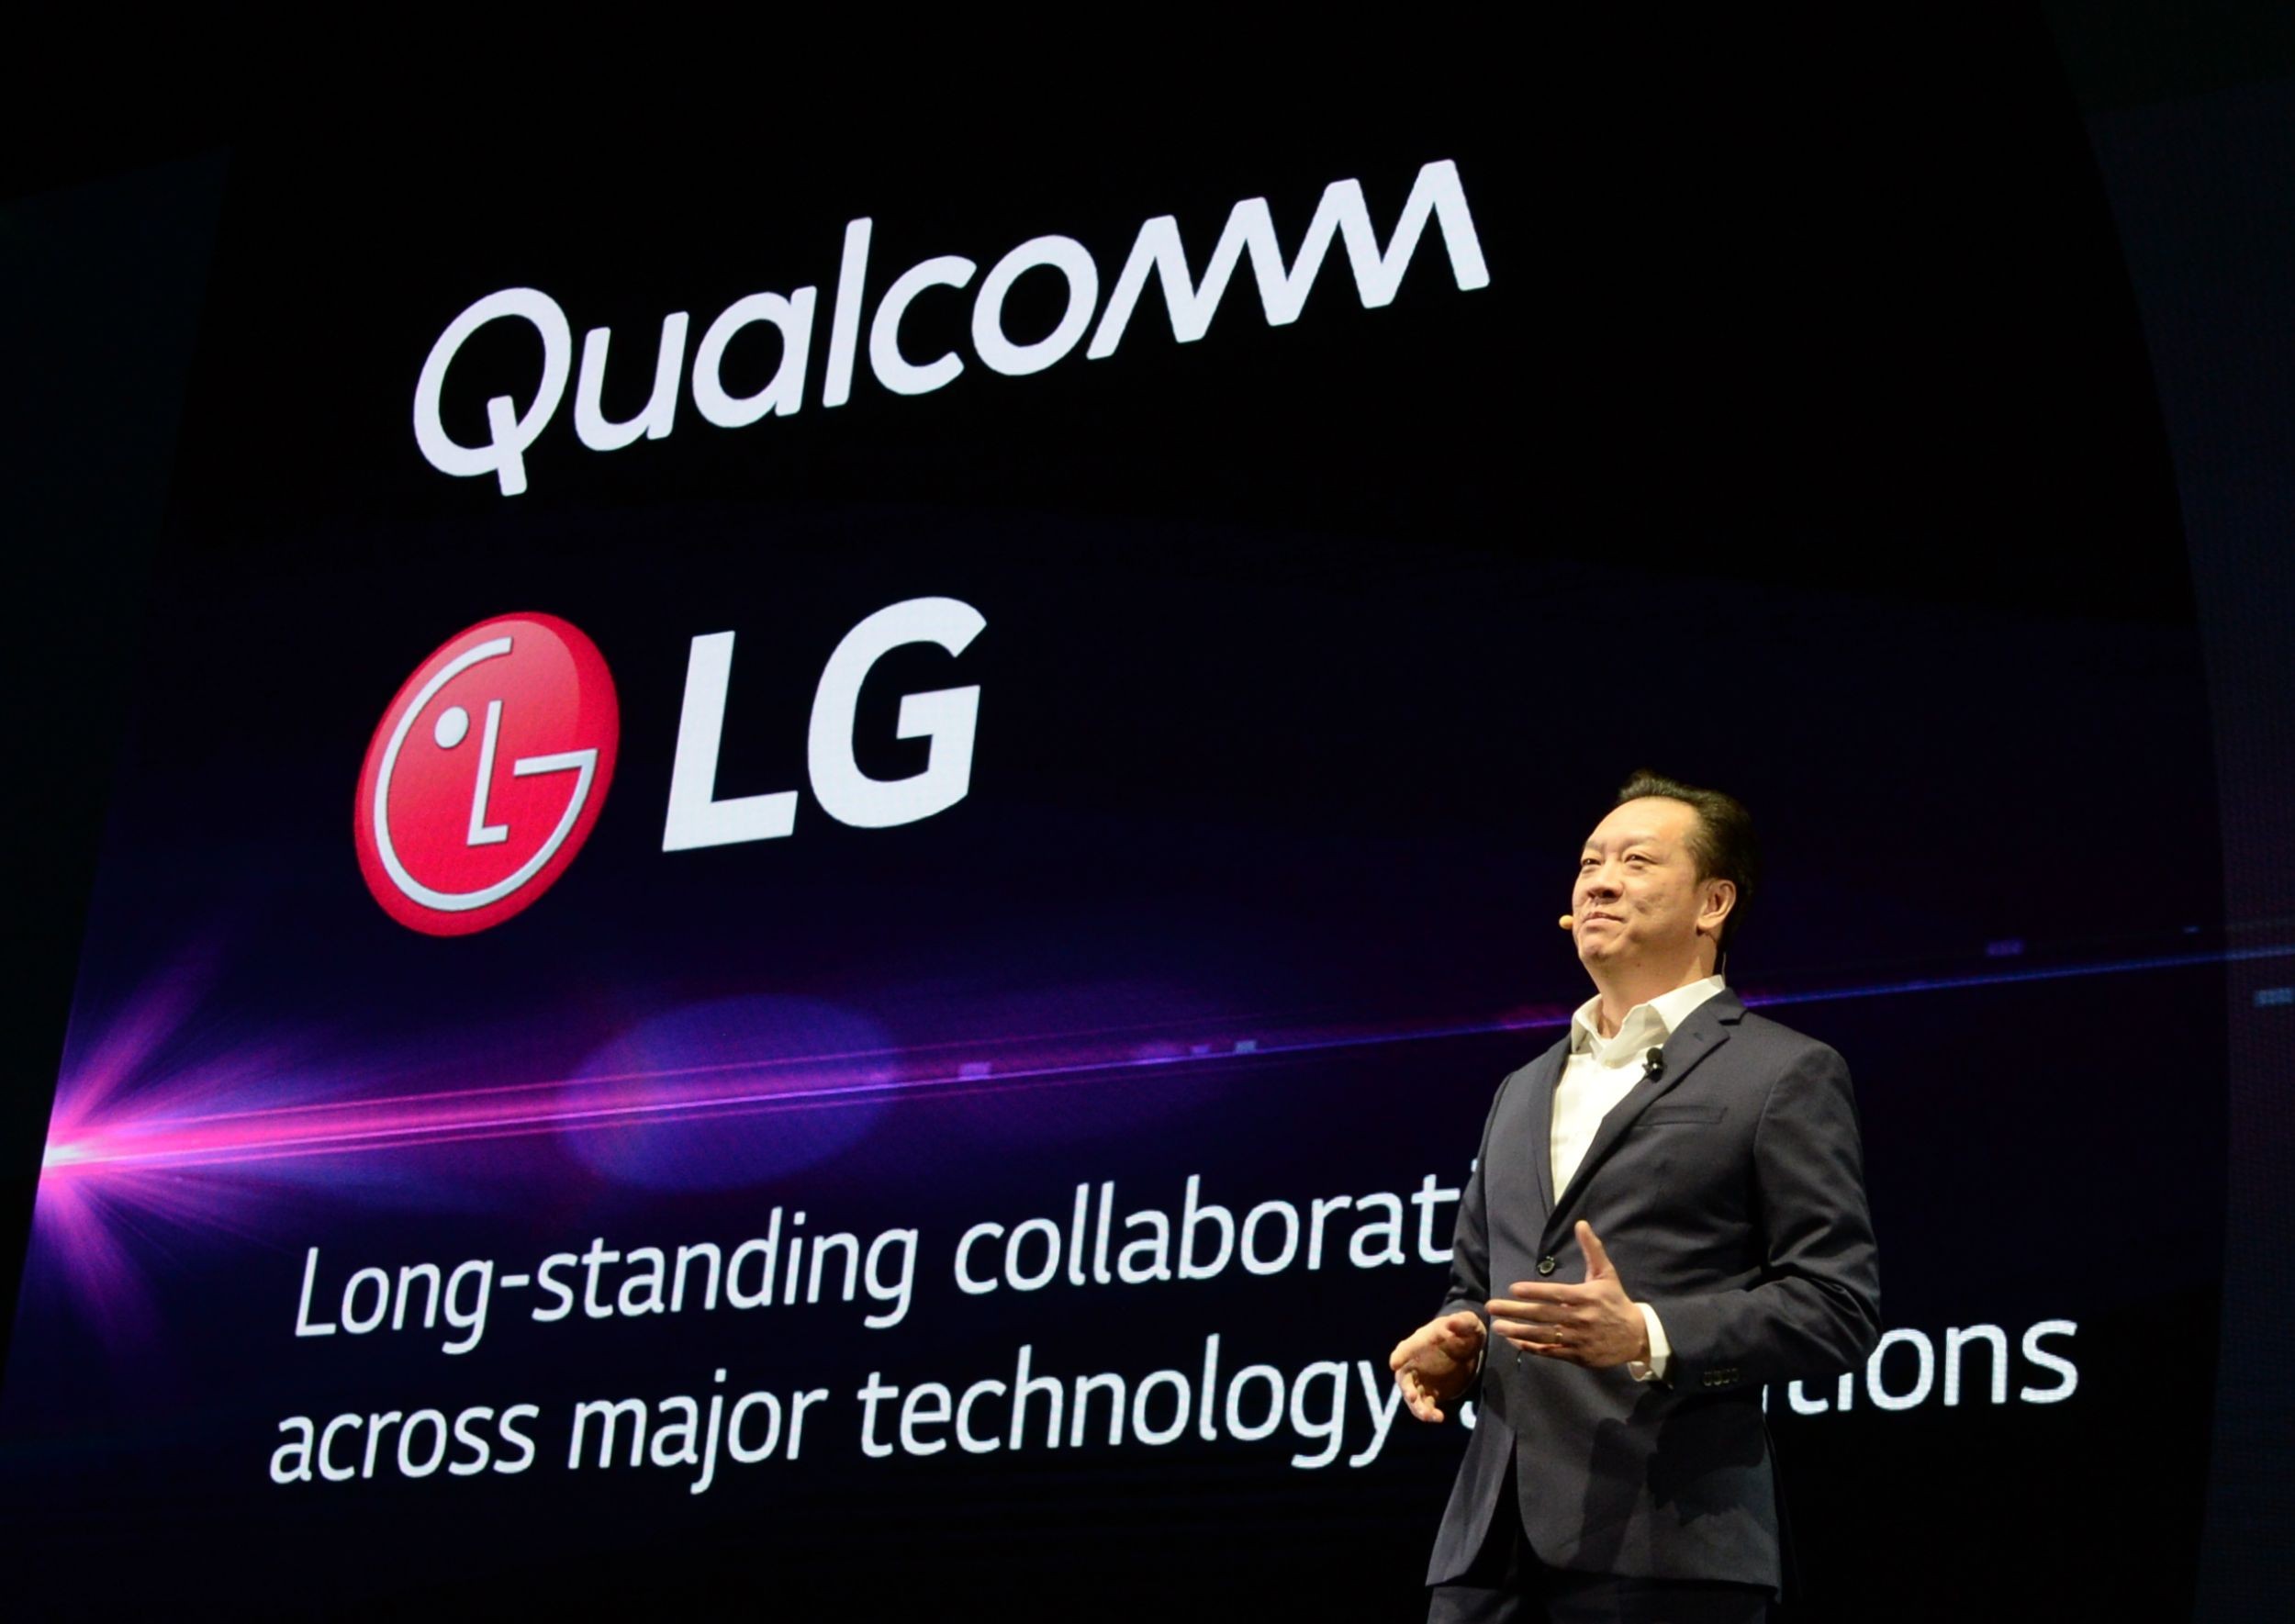 Qualcomm Senior Vice President Jim Tran discusses the partnership with LG for the enhanced 5G technology at LG's CES 2019 Press Conference.